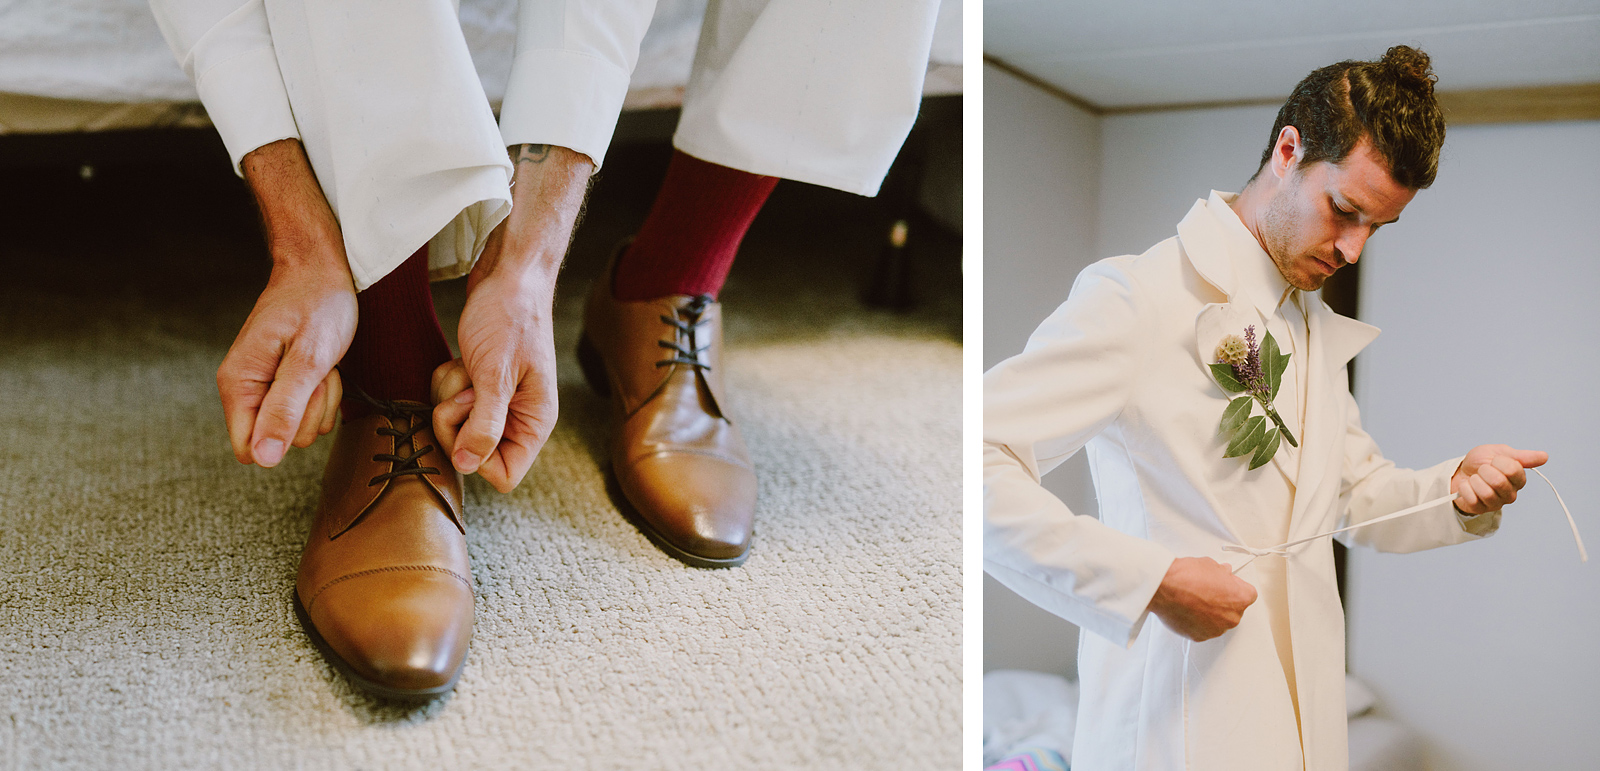 Groom getting dressed and putting on dress shoes - Columbia Gorge River Wedding in Oregon